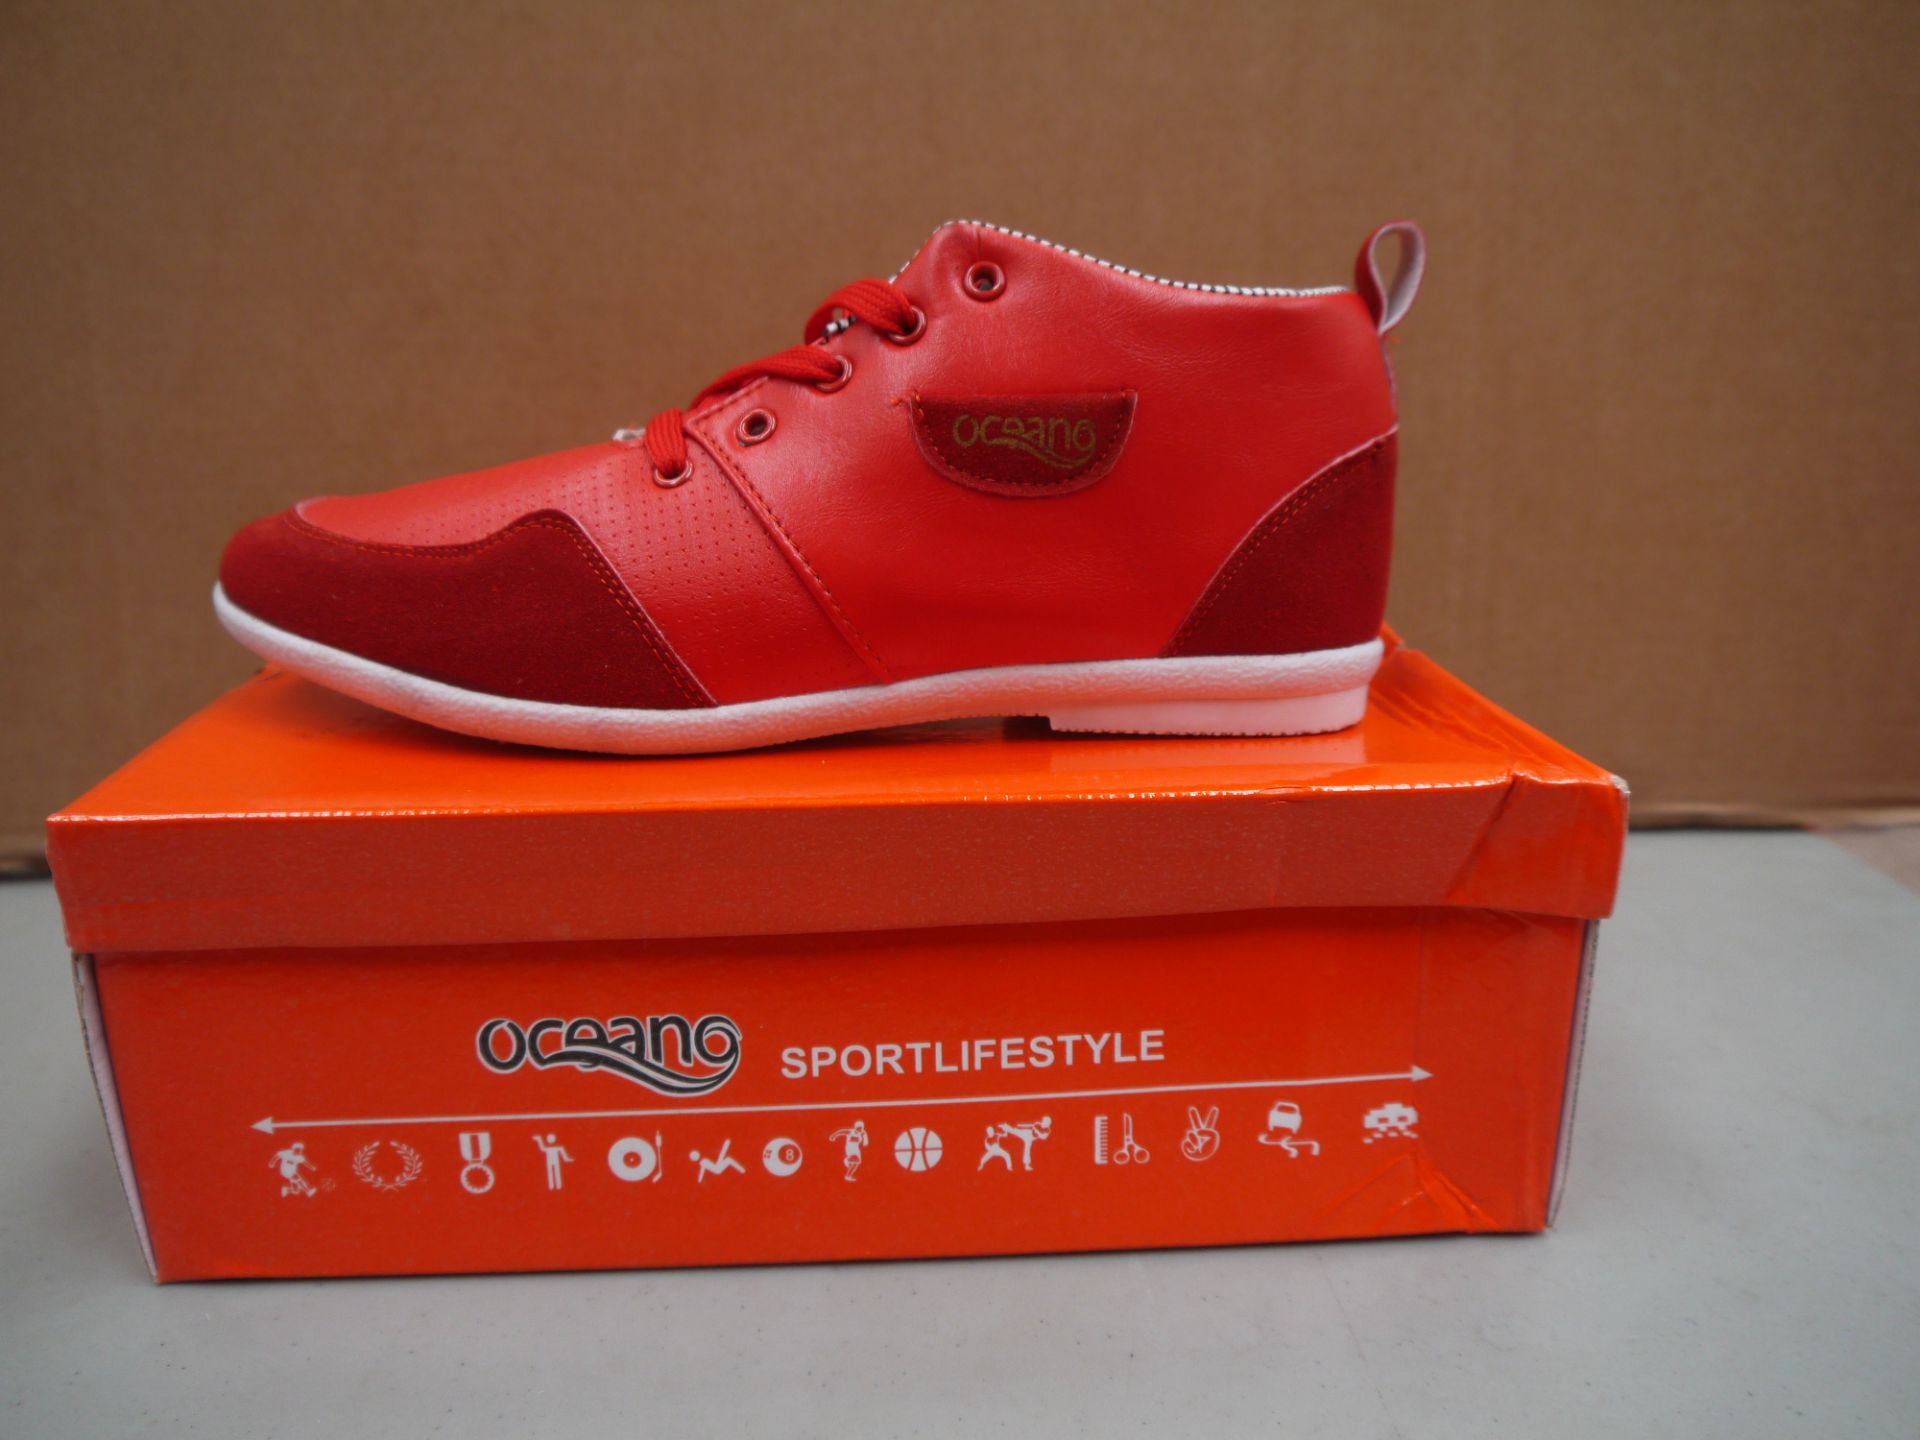 Mens Red Suede and leather Oceano trainer style boot new and boxed size UK9